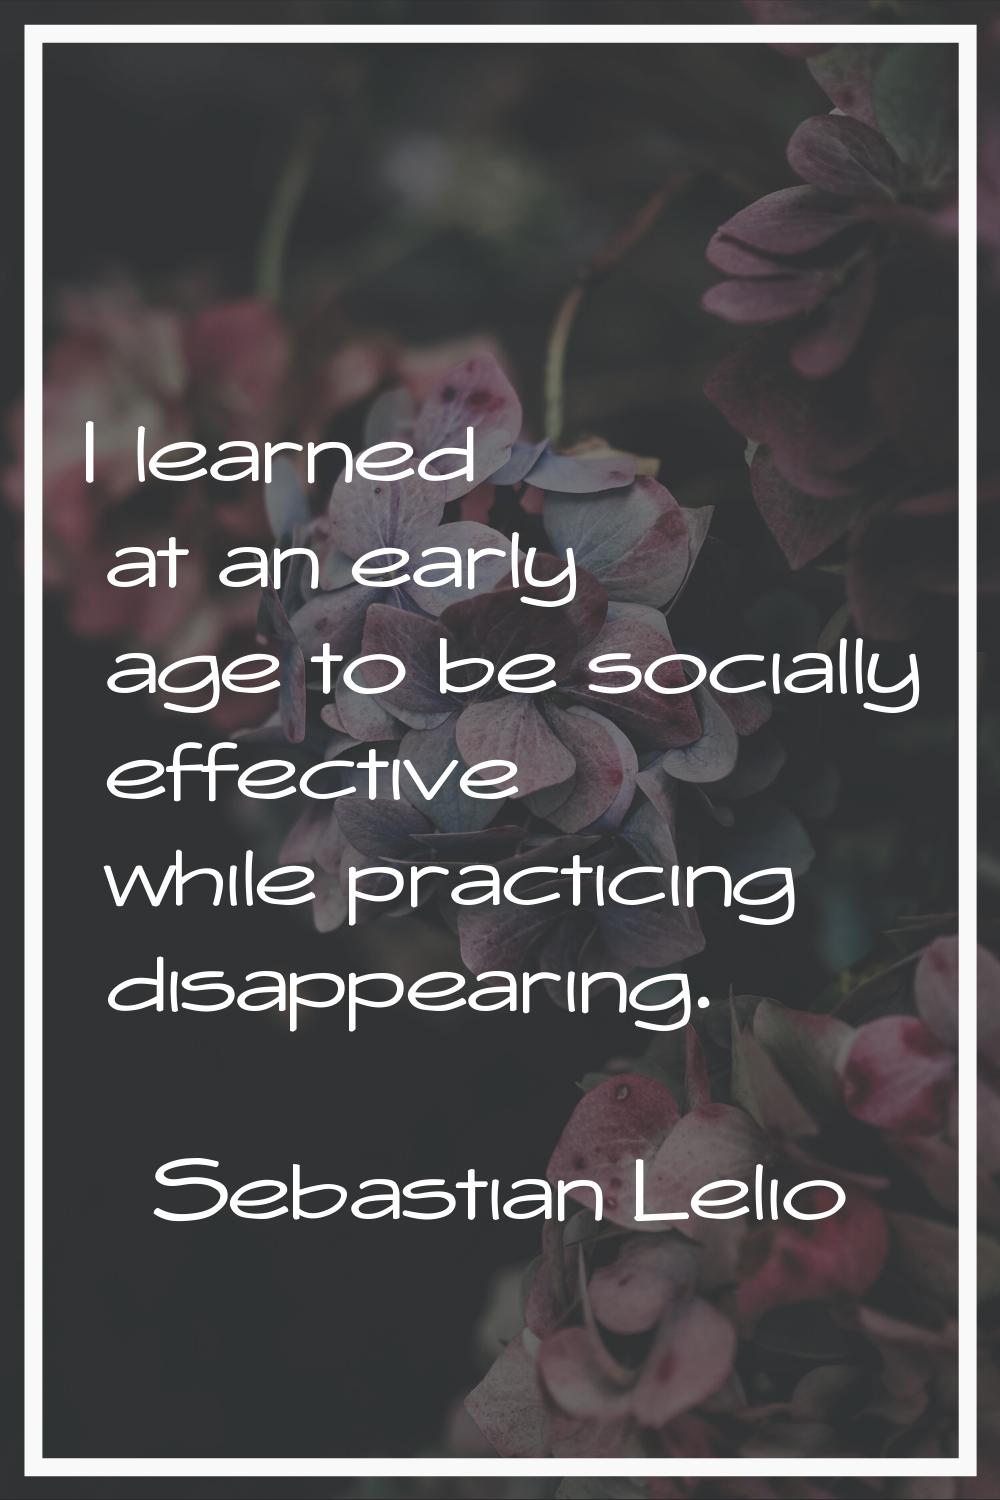 I learned at an early age to be socially effective while practicing disappearing.